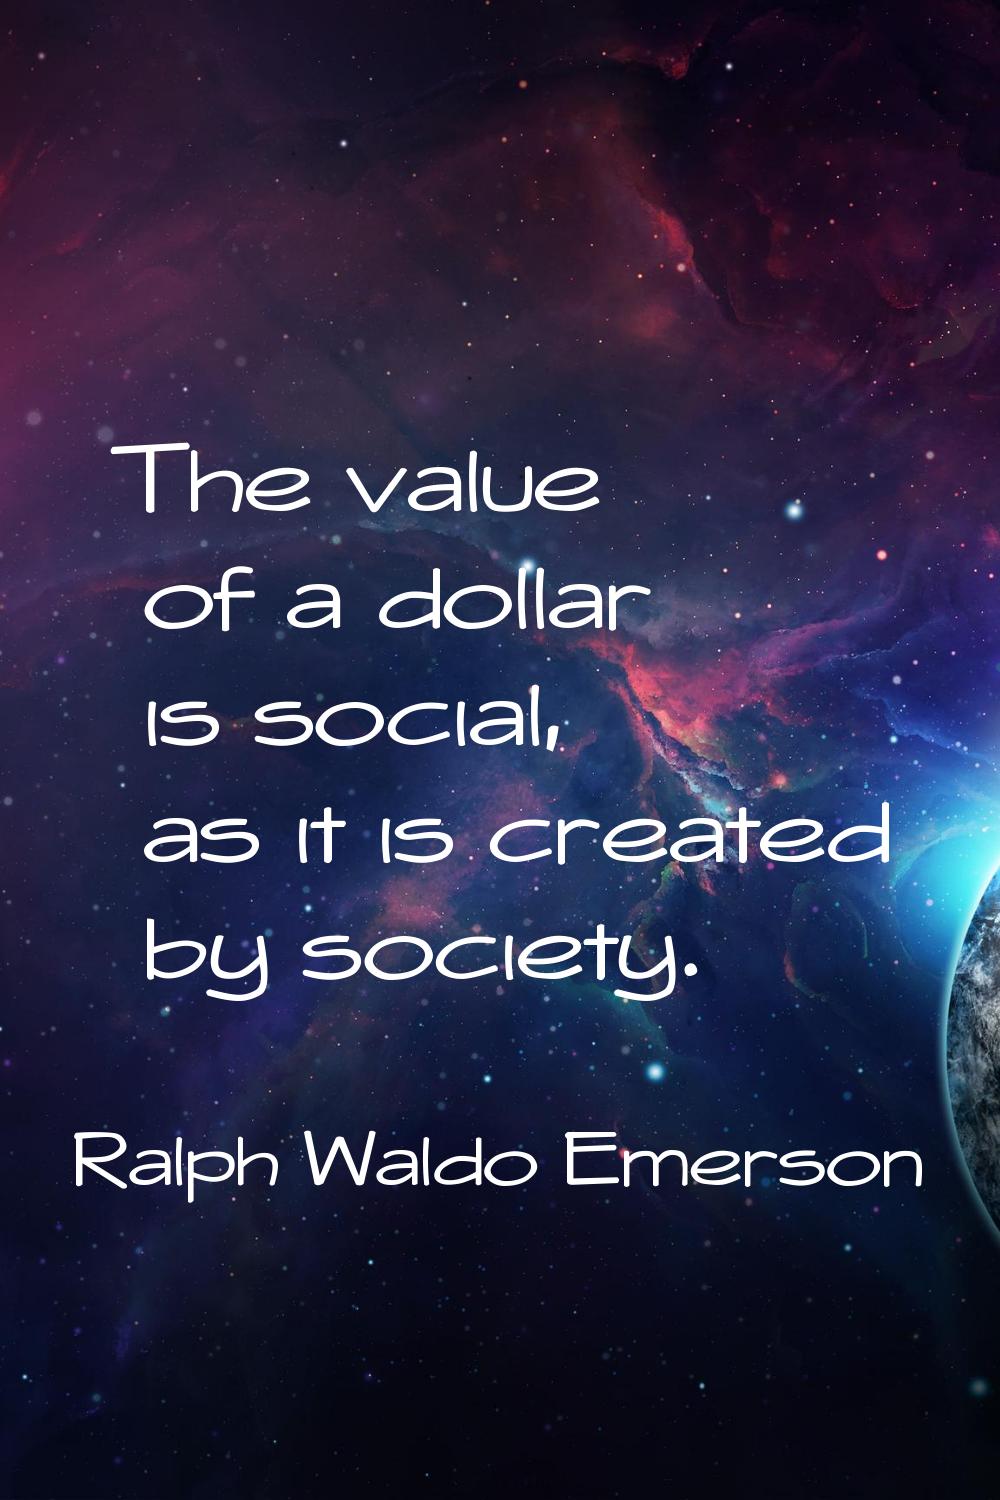 The value of a dollar is social, as it is created by society.